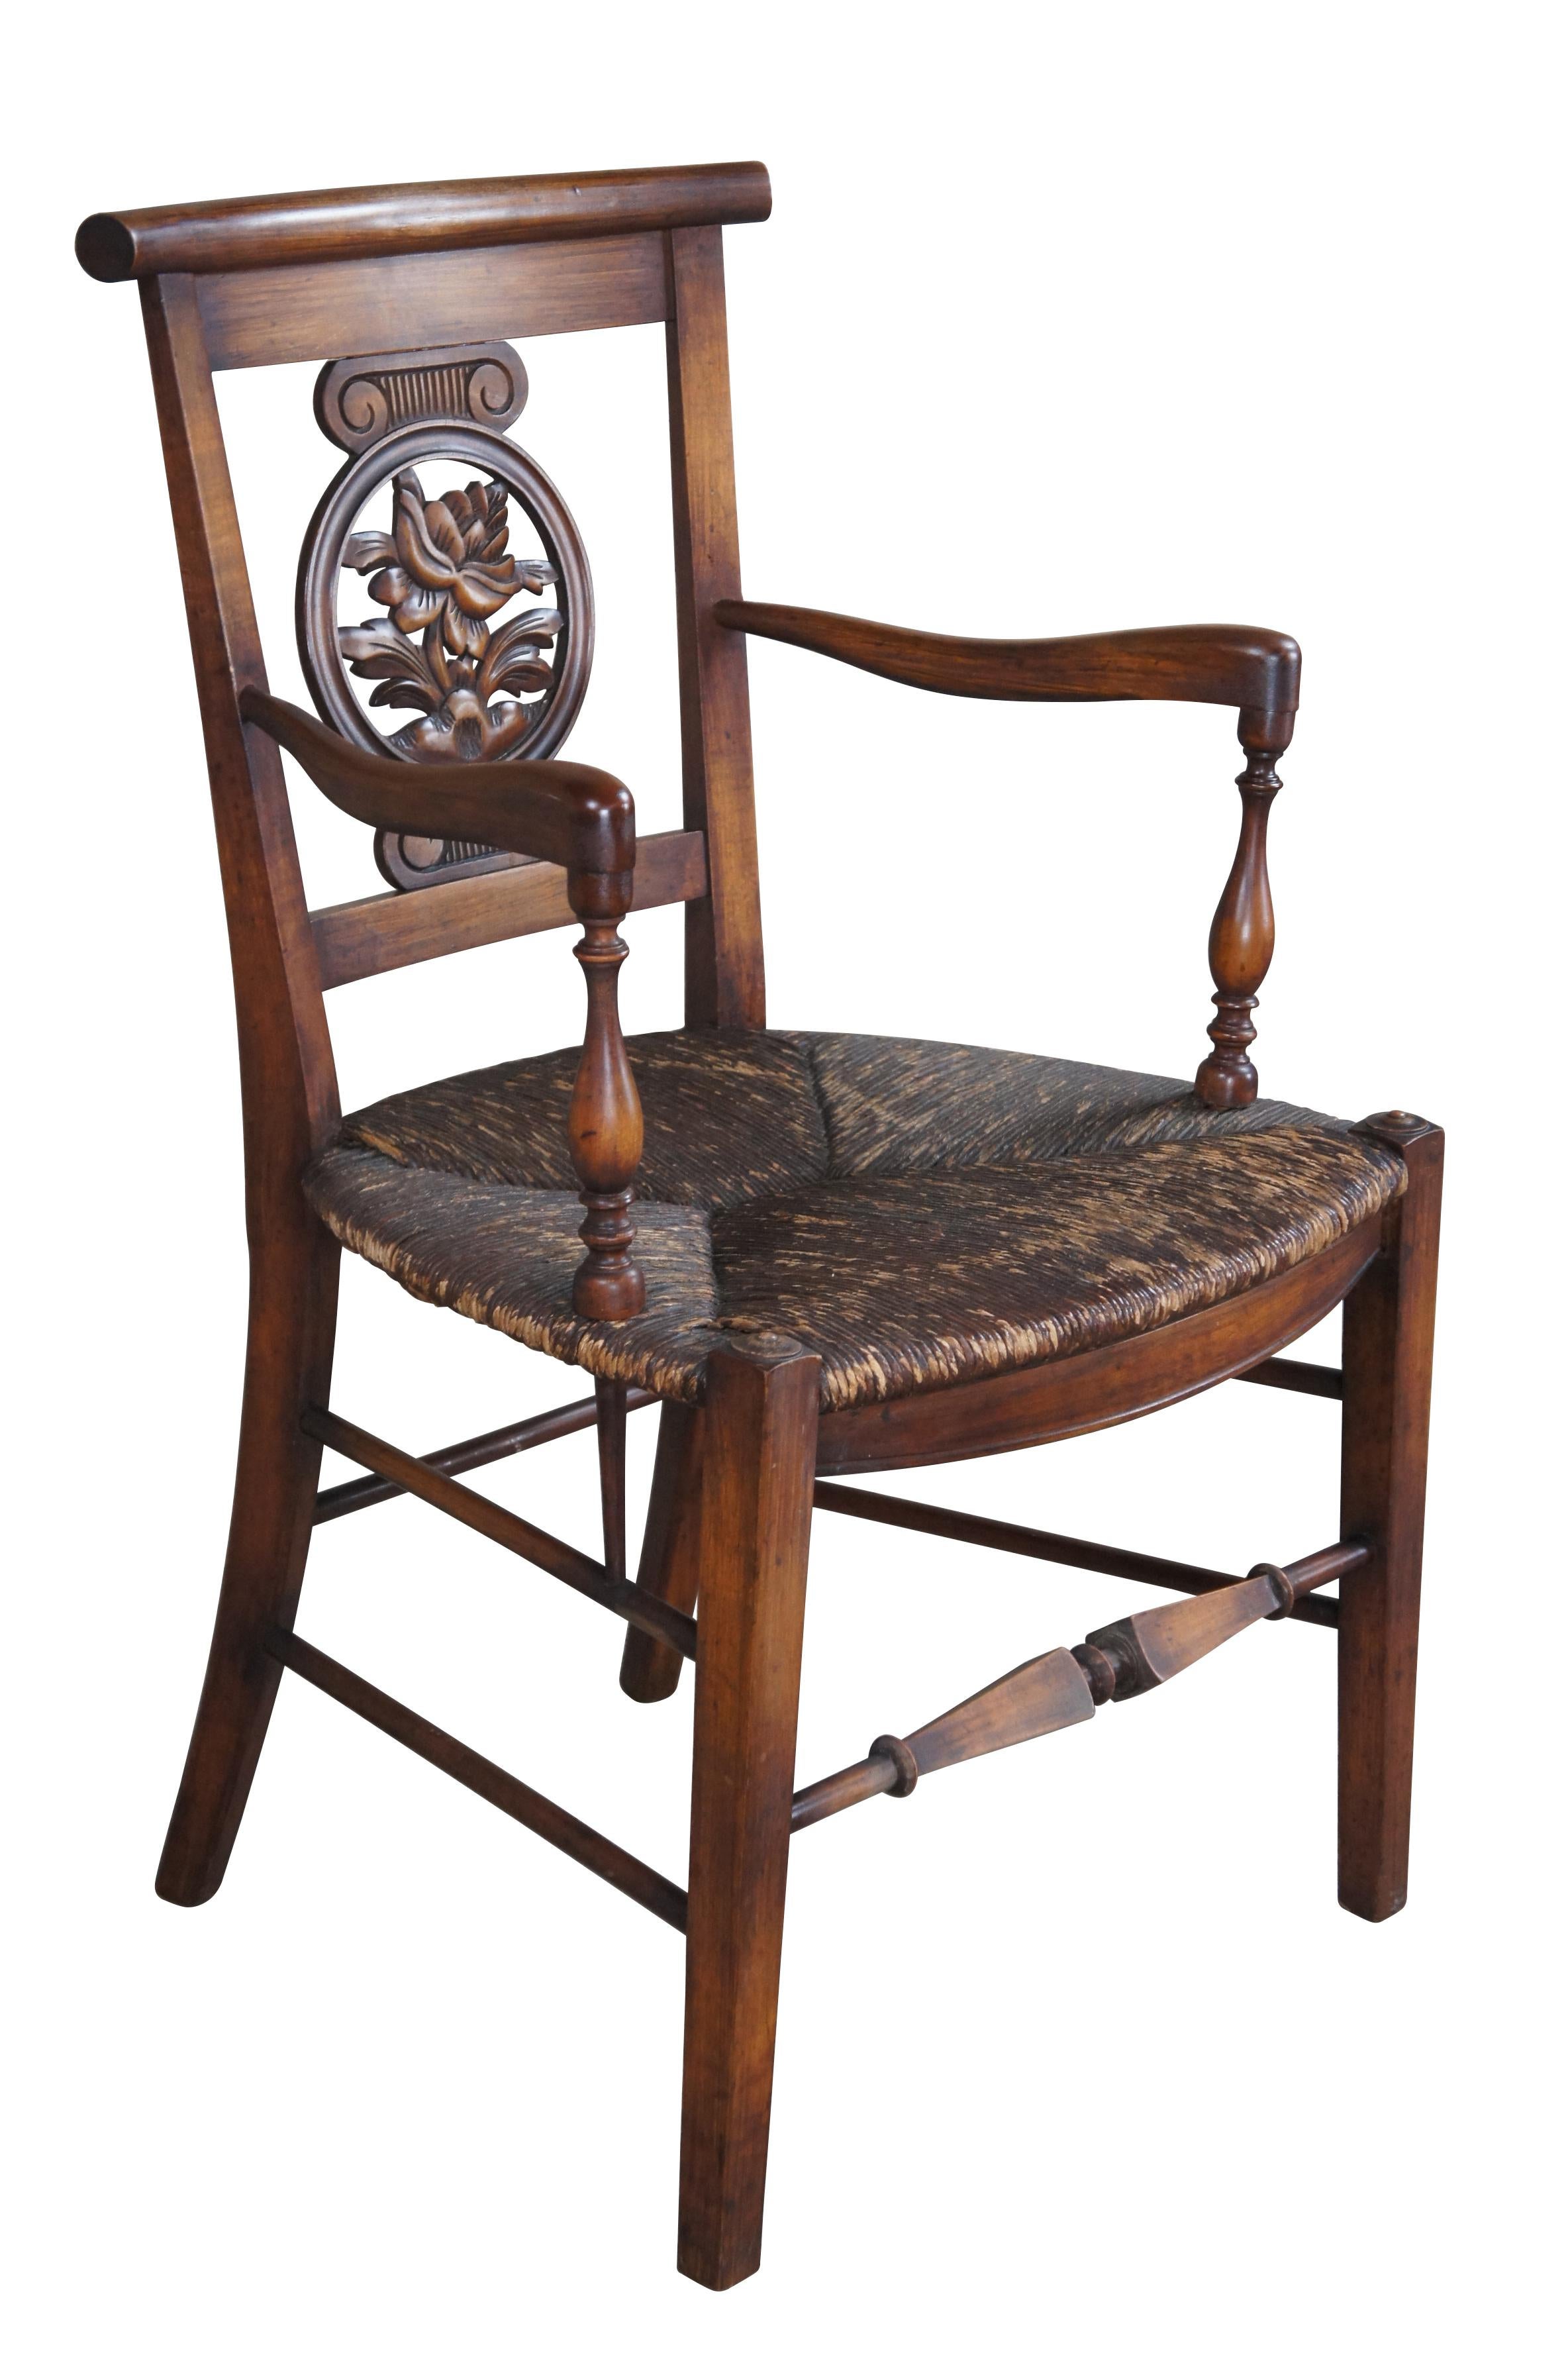 Antique Country French Arm Chair.  Made from walnut with a round botanical carved splat back set between Grecian style capitals.  Features turned arm supports and a unique square tapered stretcher along the front.

Dimensions:
21